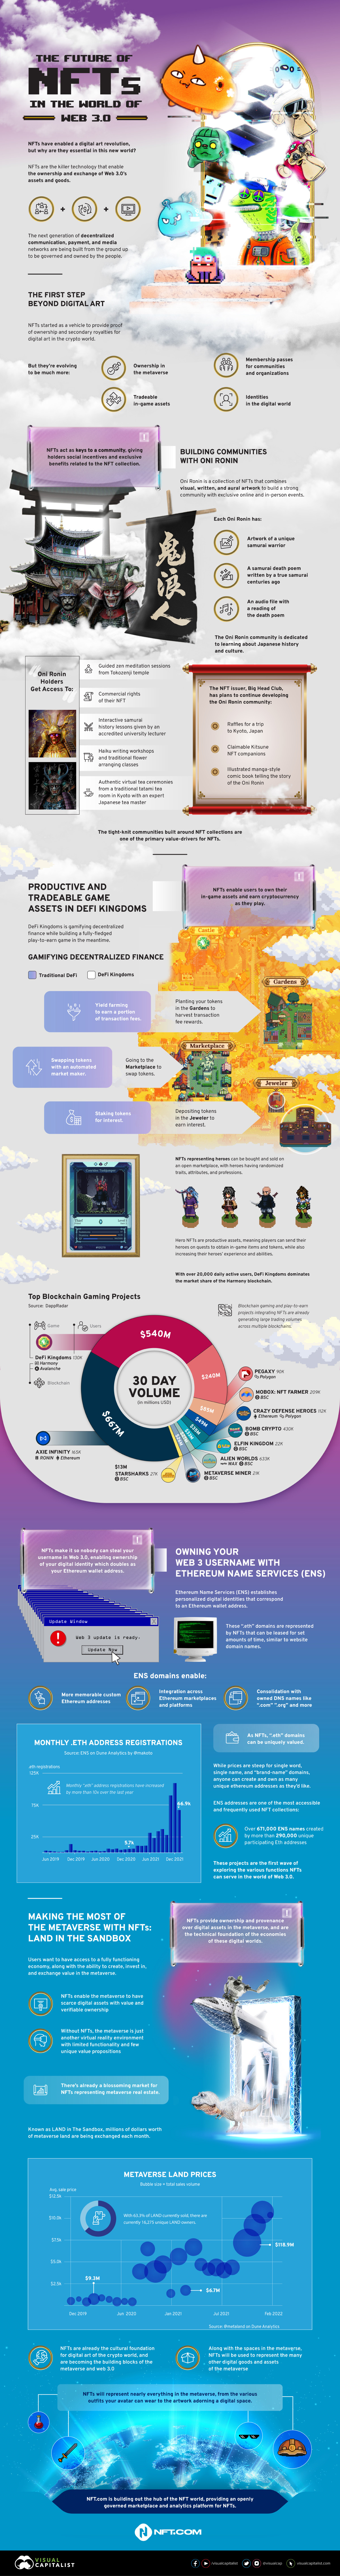 the future of nfts in the world of web 3.0 – visual capitalist